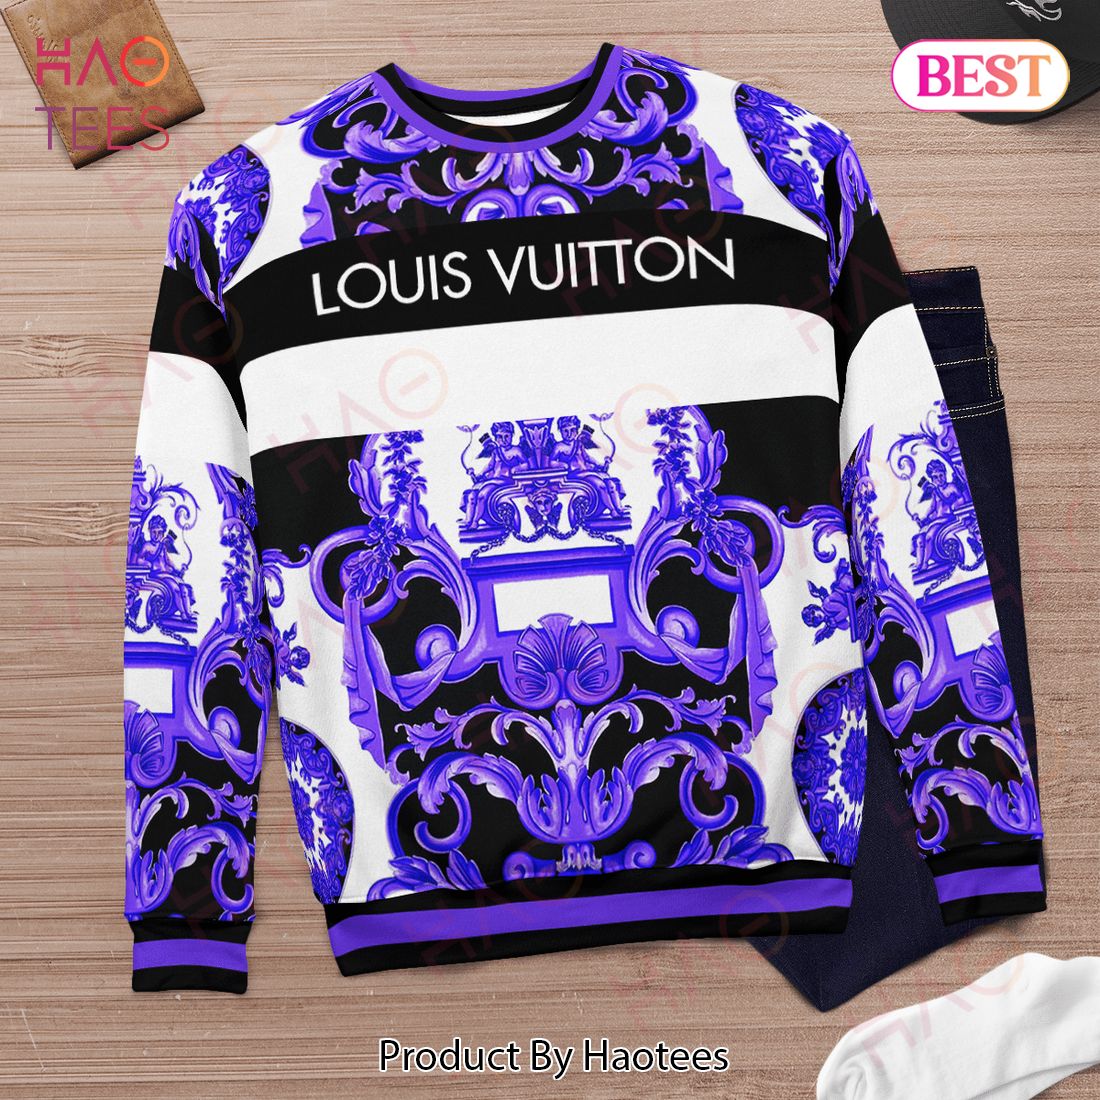 Best Louis Vuitton Purple Multi Baroque Print Ugly Christmas Sweater Limited Edition